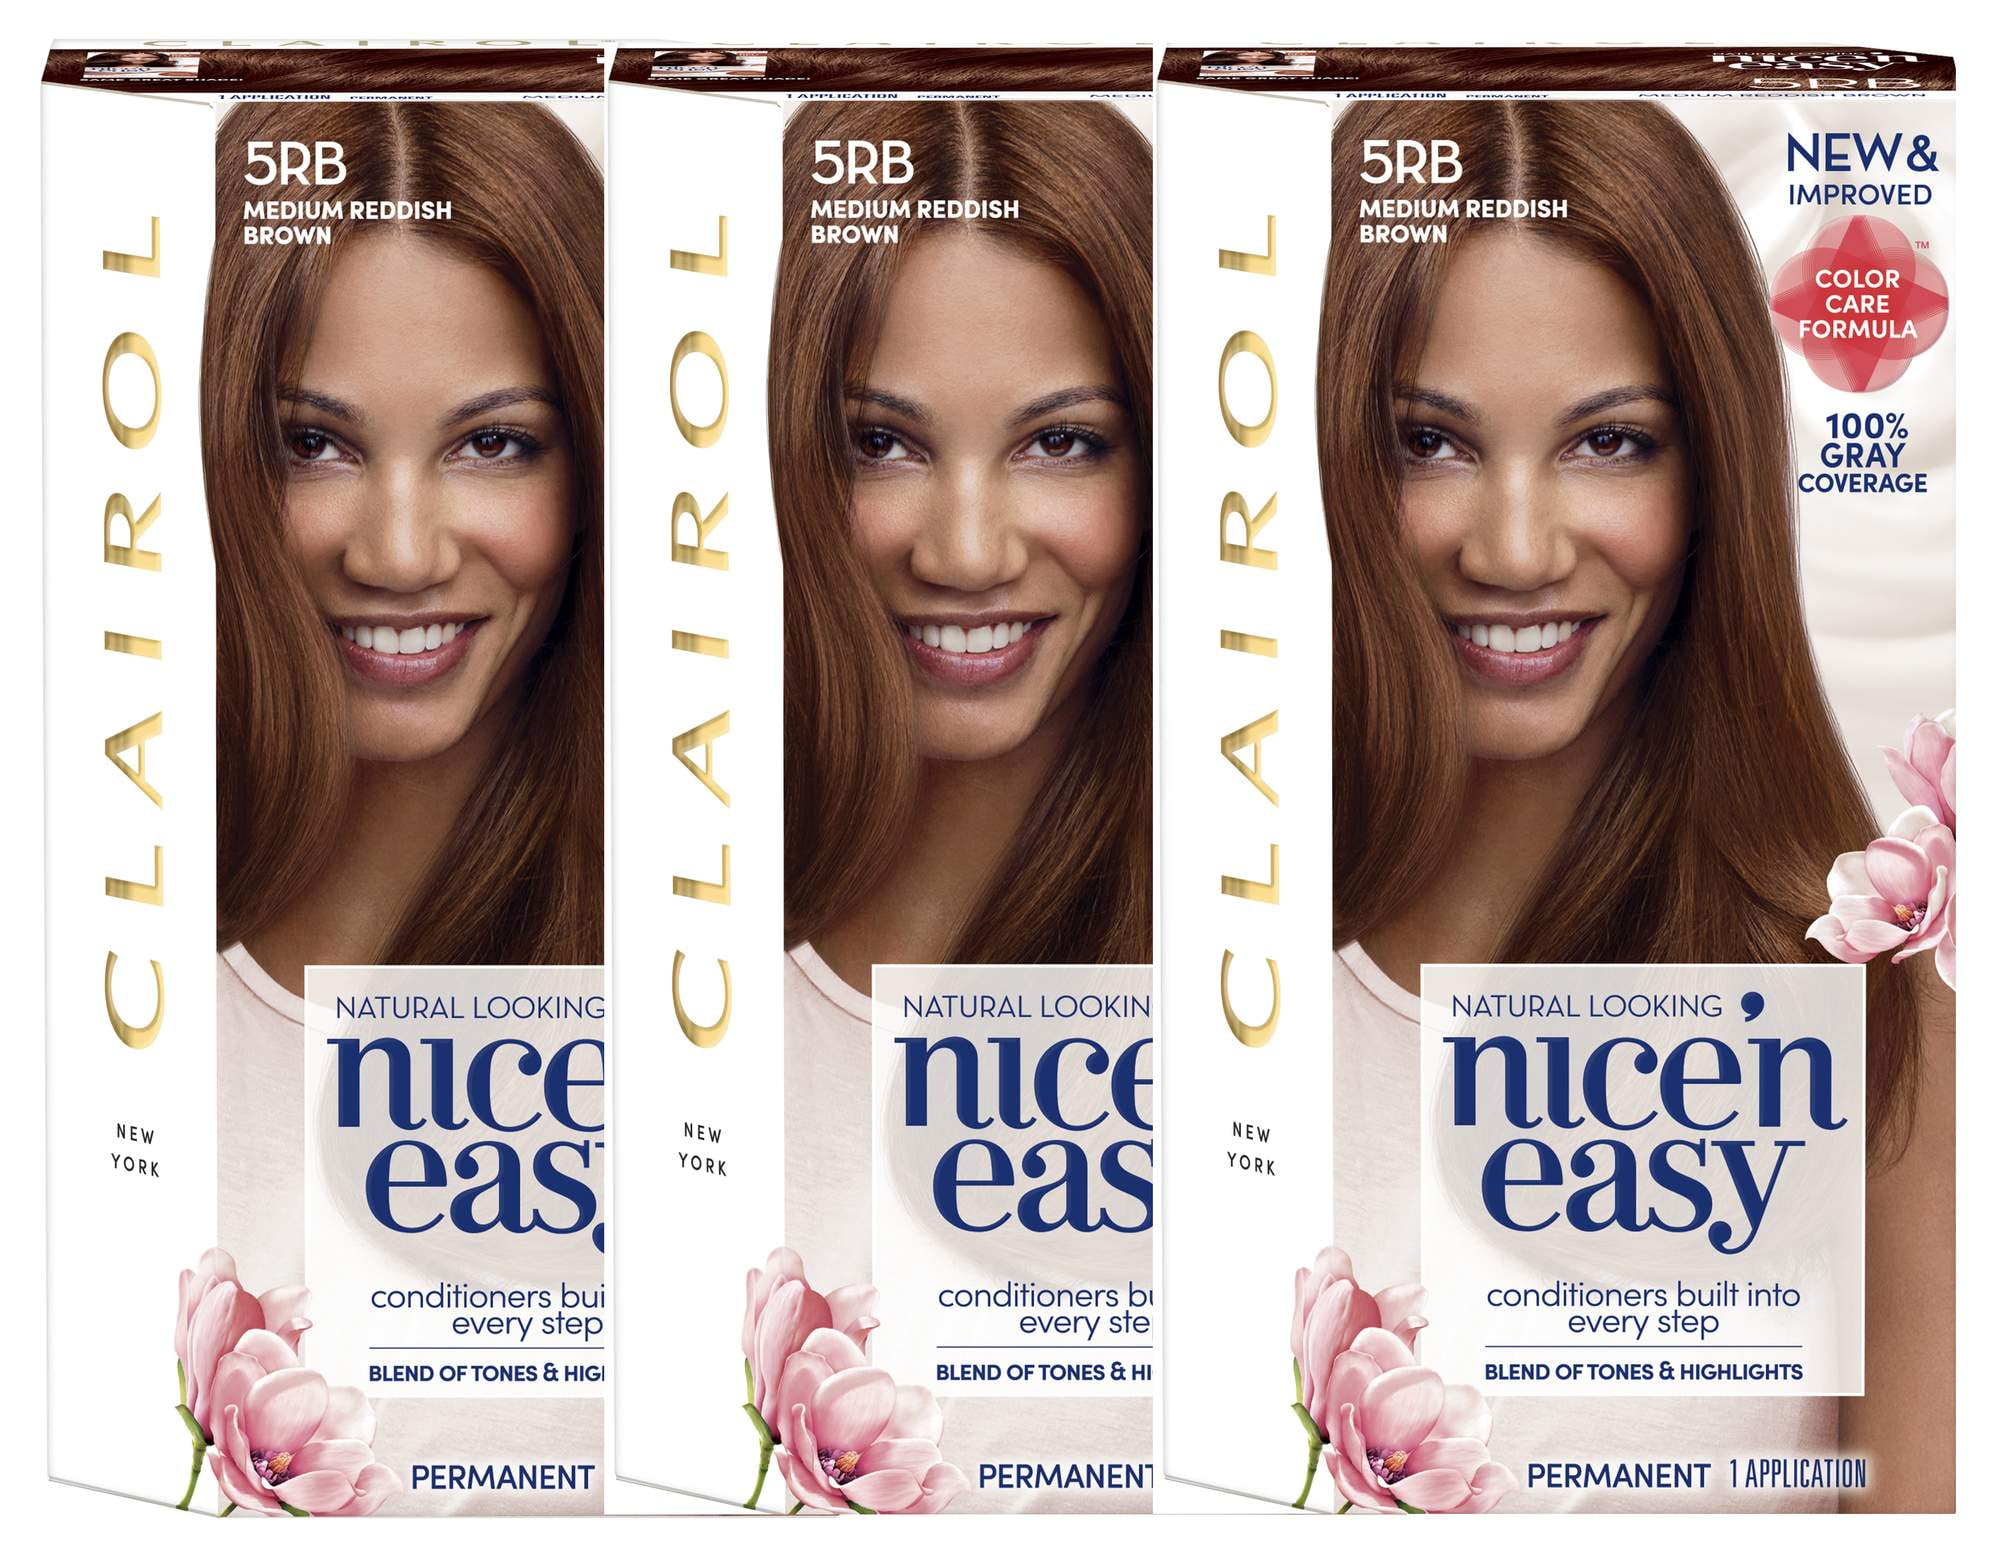 Clairol Nice'n Easy Permanent Hair Color, 6GZ Light Golden Sunlit Blonde, Pack of 1 - wide 3